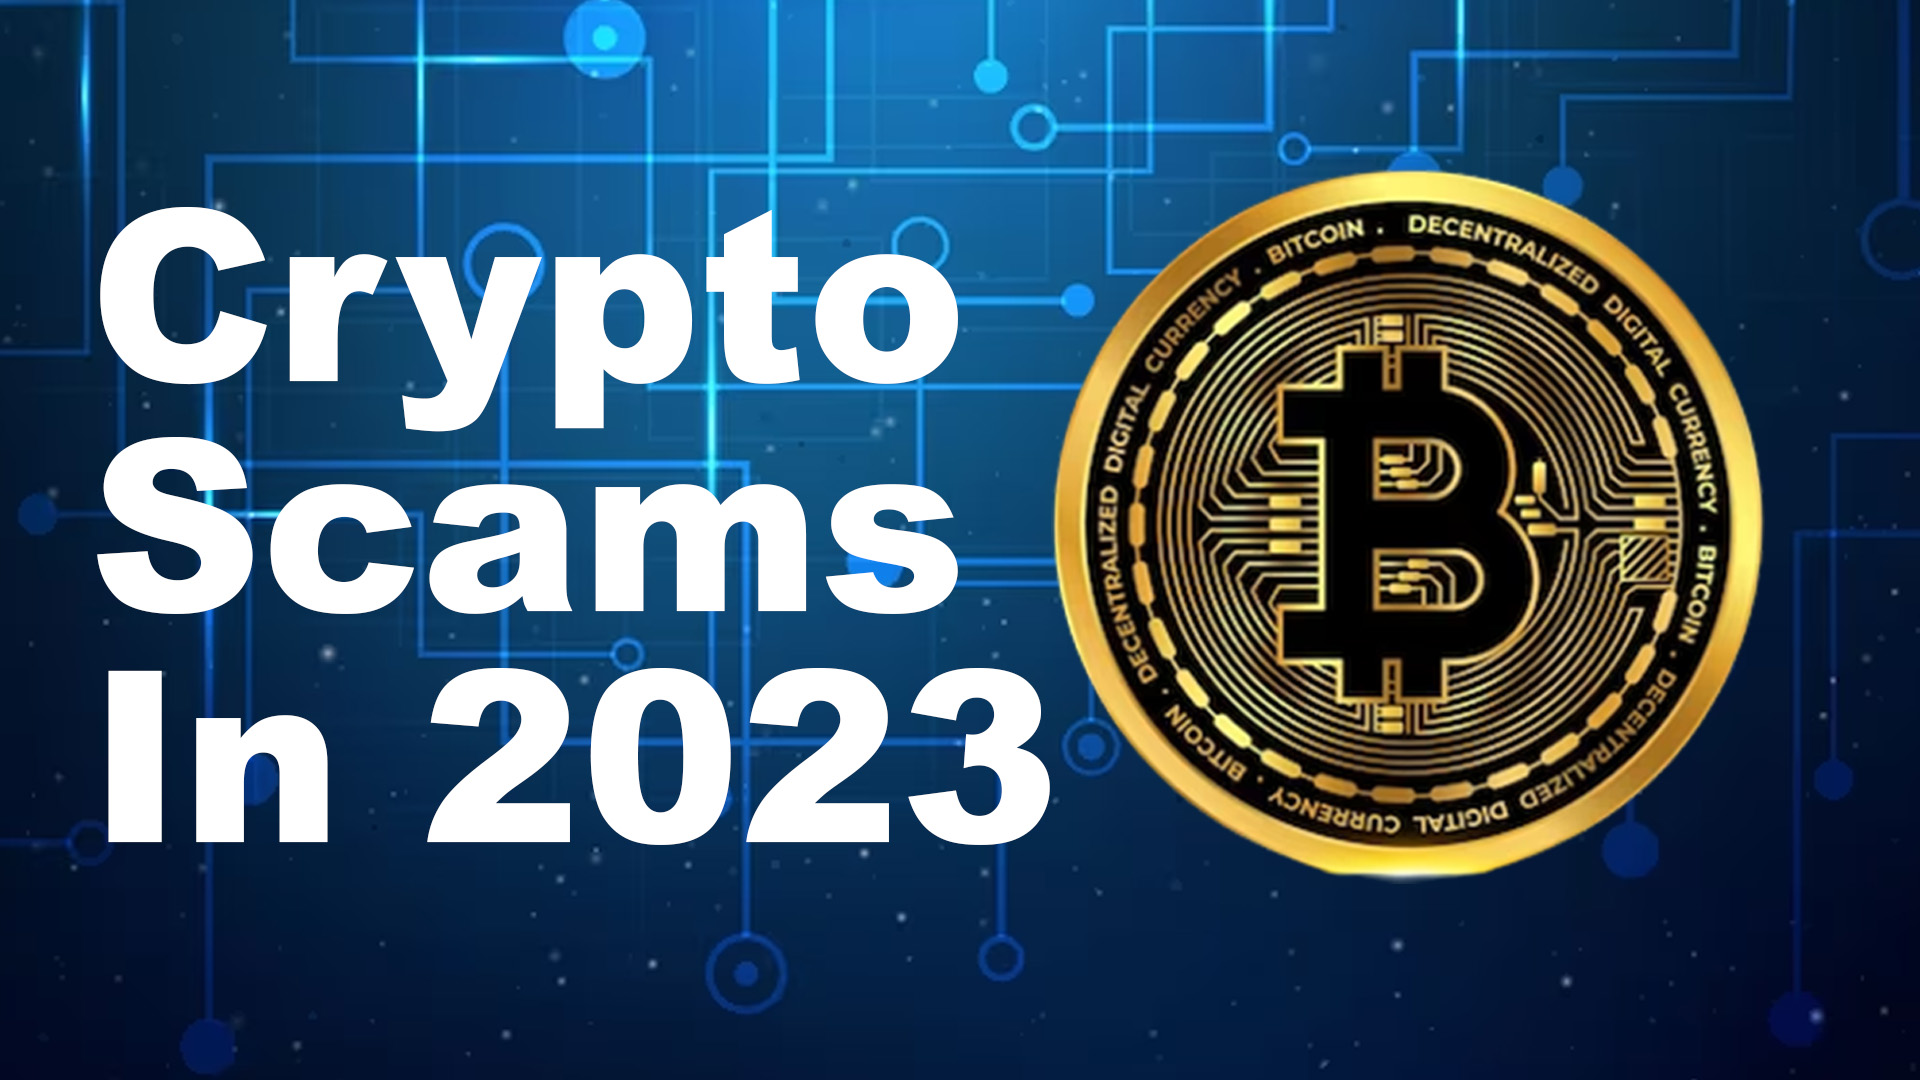 What are Cryptocurrency Scams? Top 3 Crypto Scams of 2023